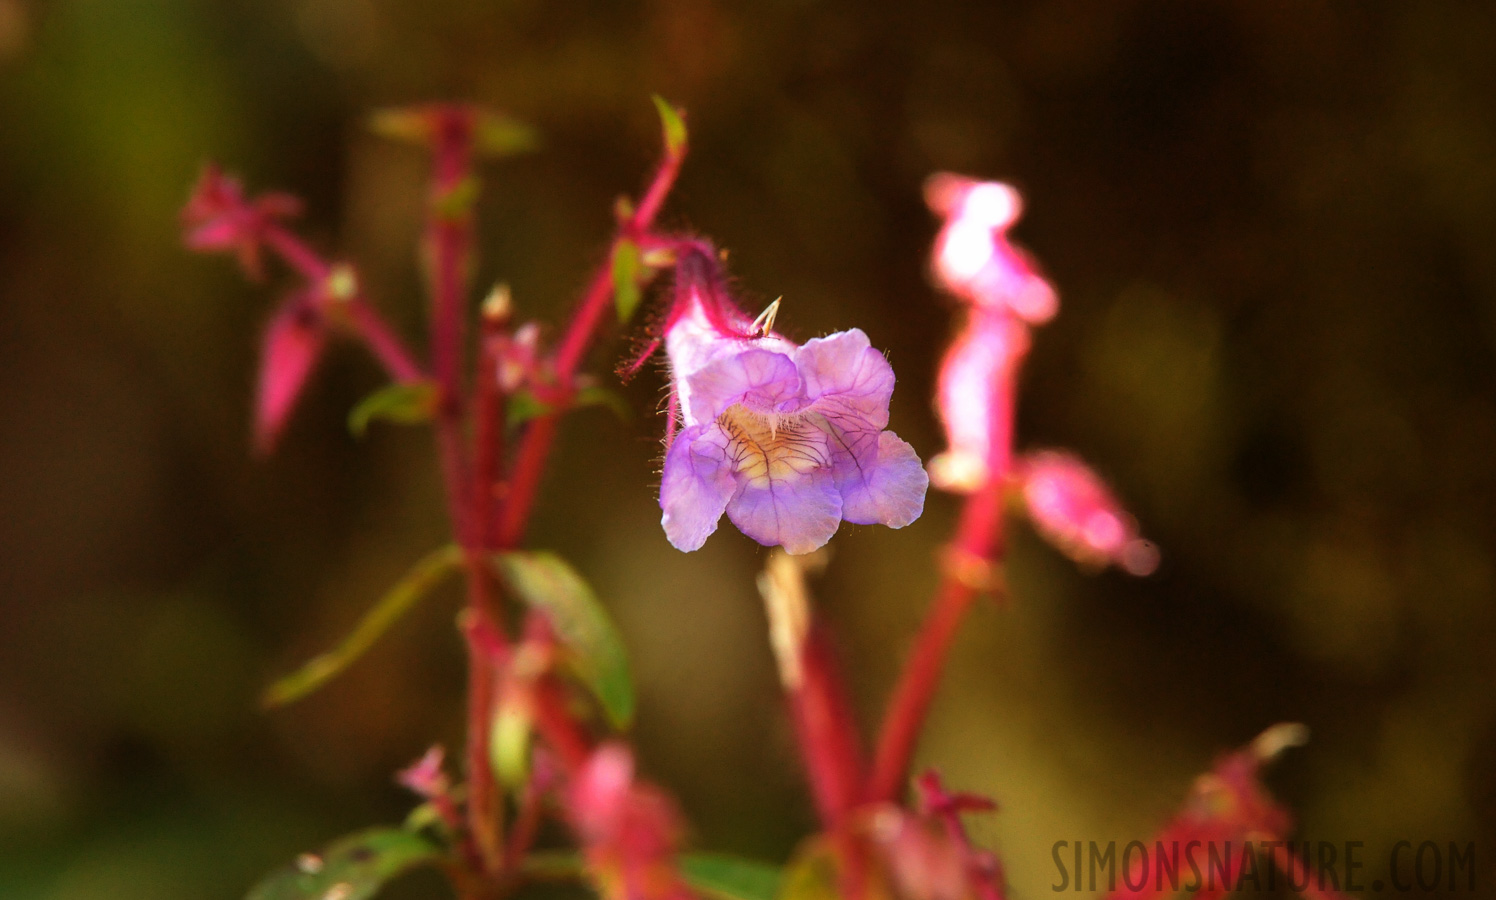 Strobilanthes sp [550 mm, 1/200 sec at f / 11, ISO 4000]